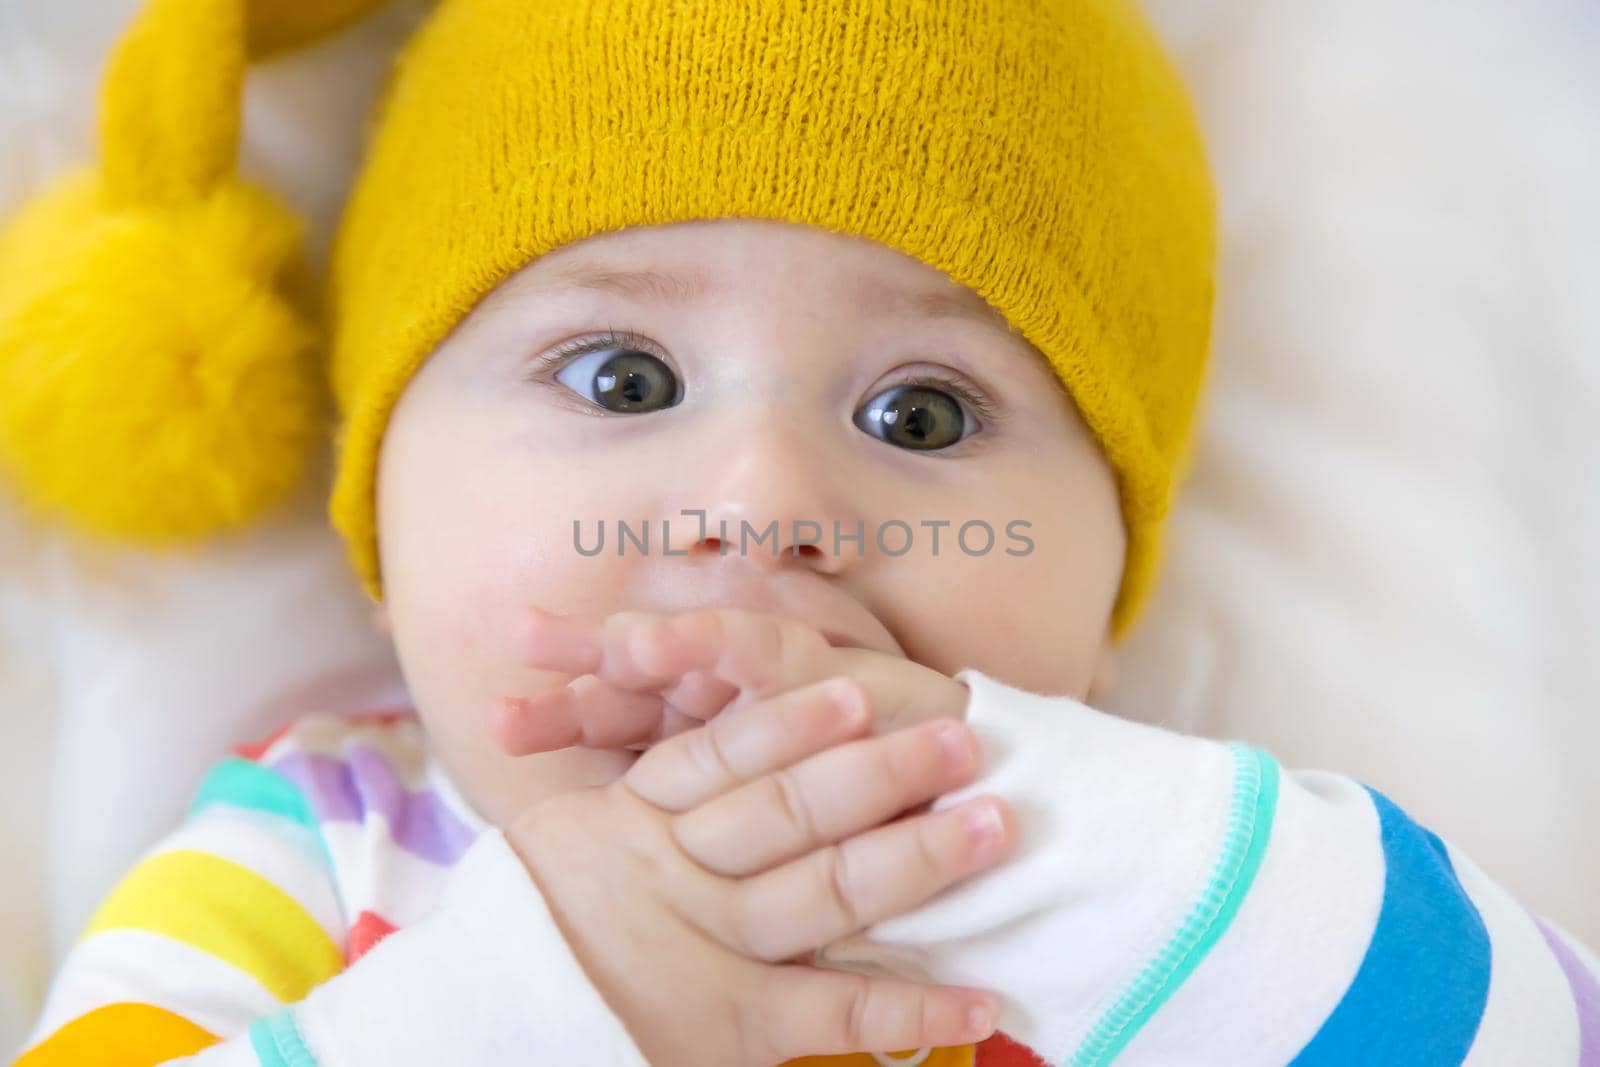 Baby puts his hands in his mouth. Selective focus. People.